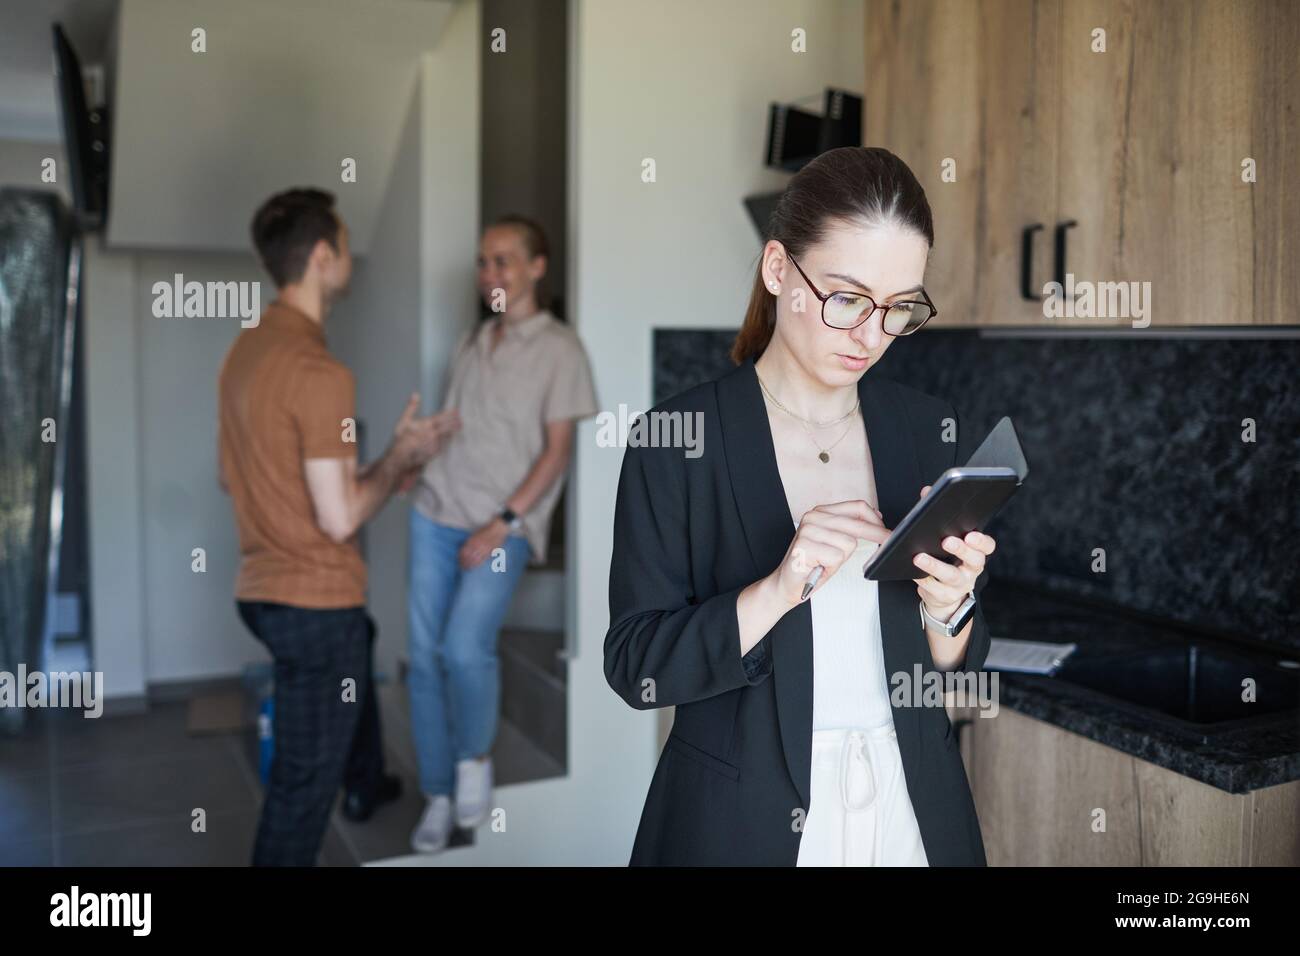 Waist up portrait of female real estate agent using smartphone with young couple in background, copy space Stock Photo